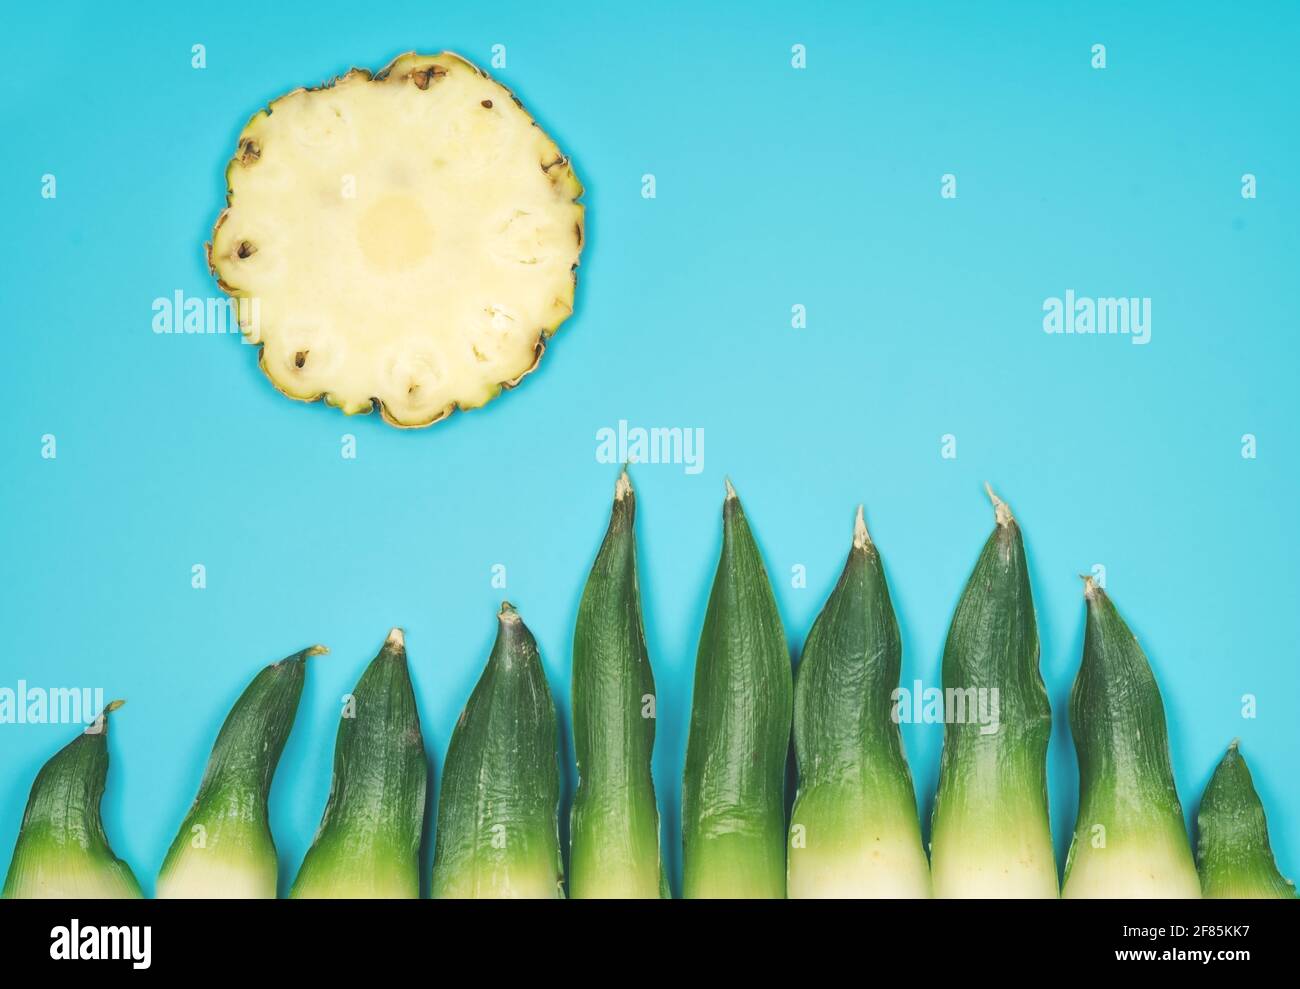 Fun minimalistic summer background with sun and gras on turquoise sky made by fresh pineapple Stock Photo